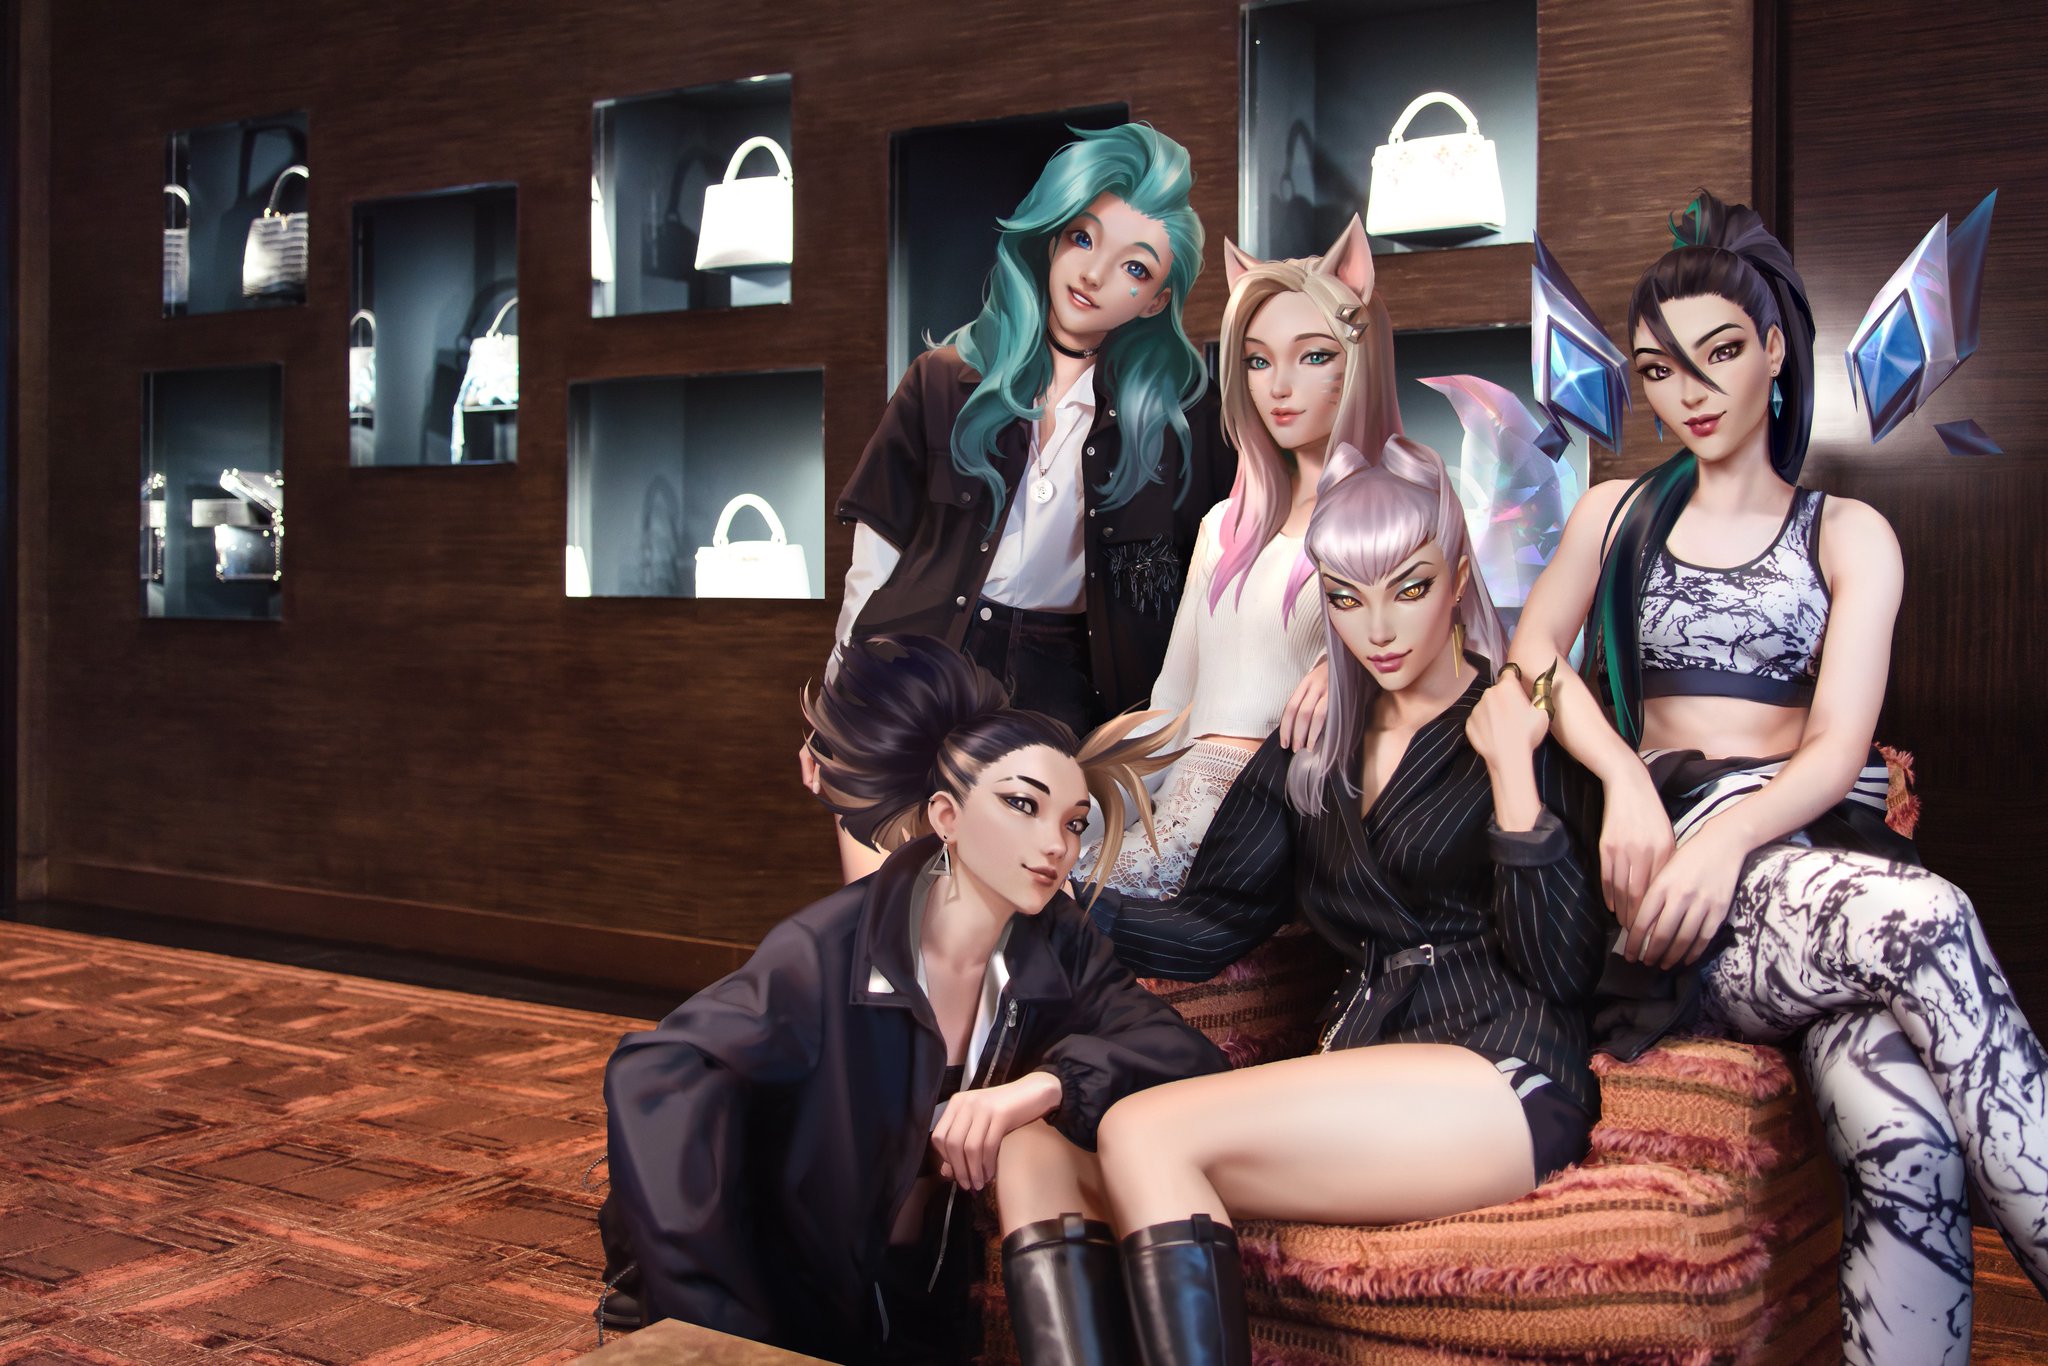 K/DA on X: Let's take it to the top. // Visiting @louisvuitton for a  fitting session today. #KDA #LVxKDA  / X